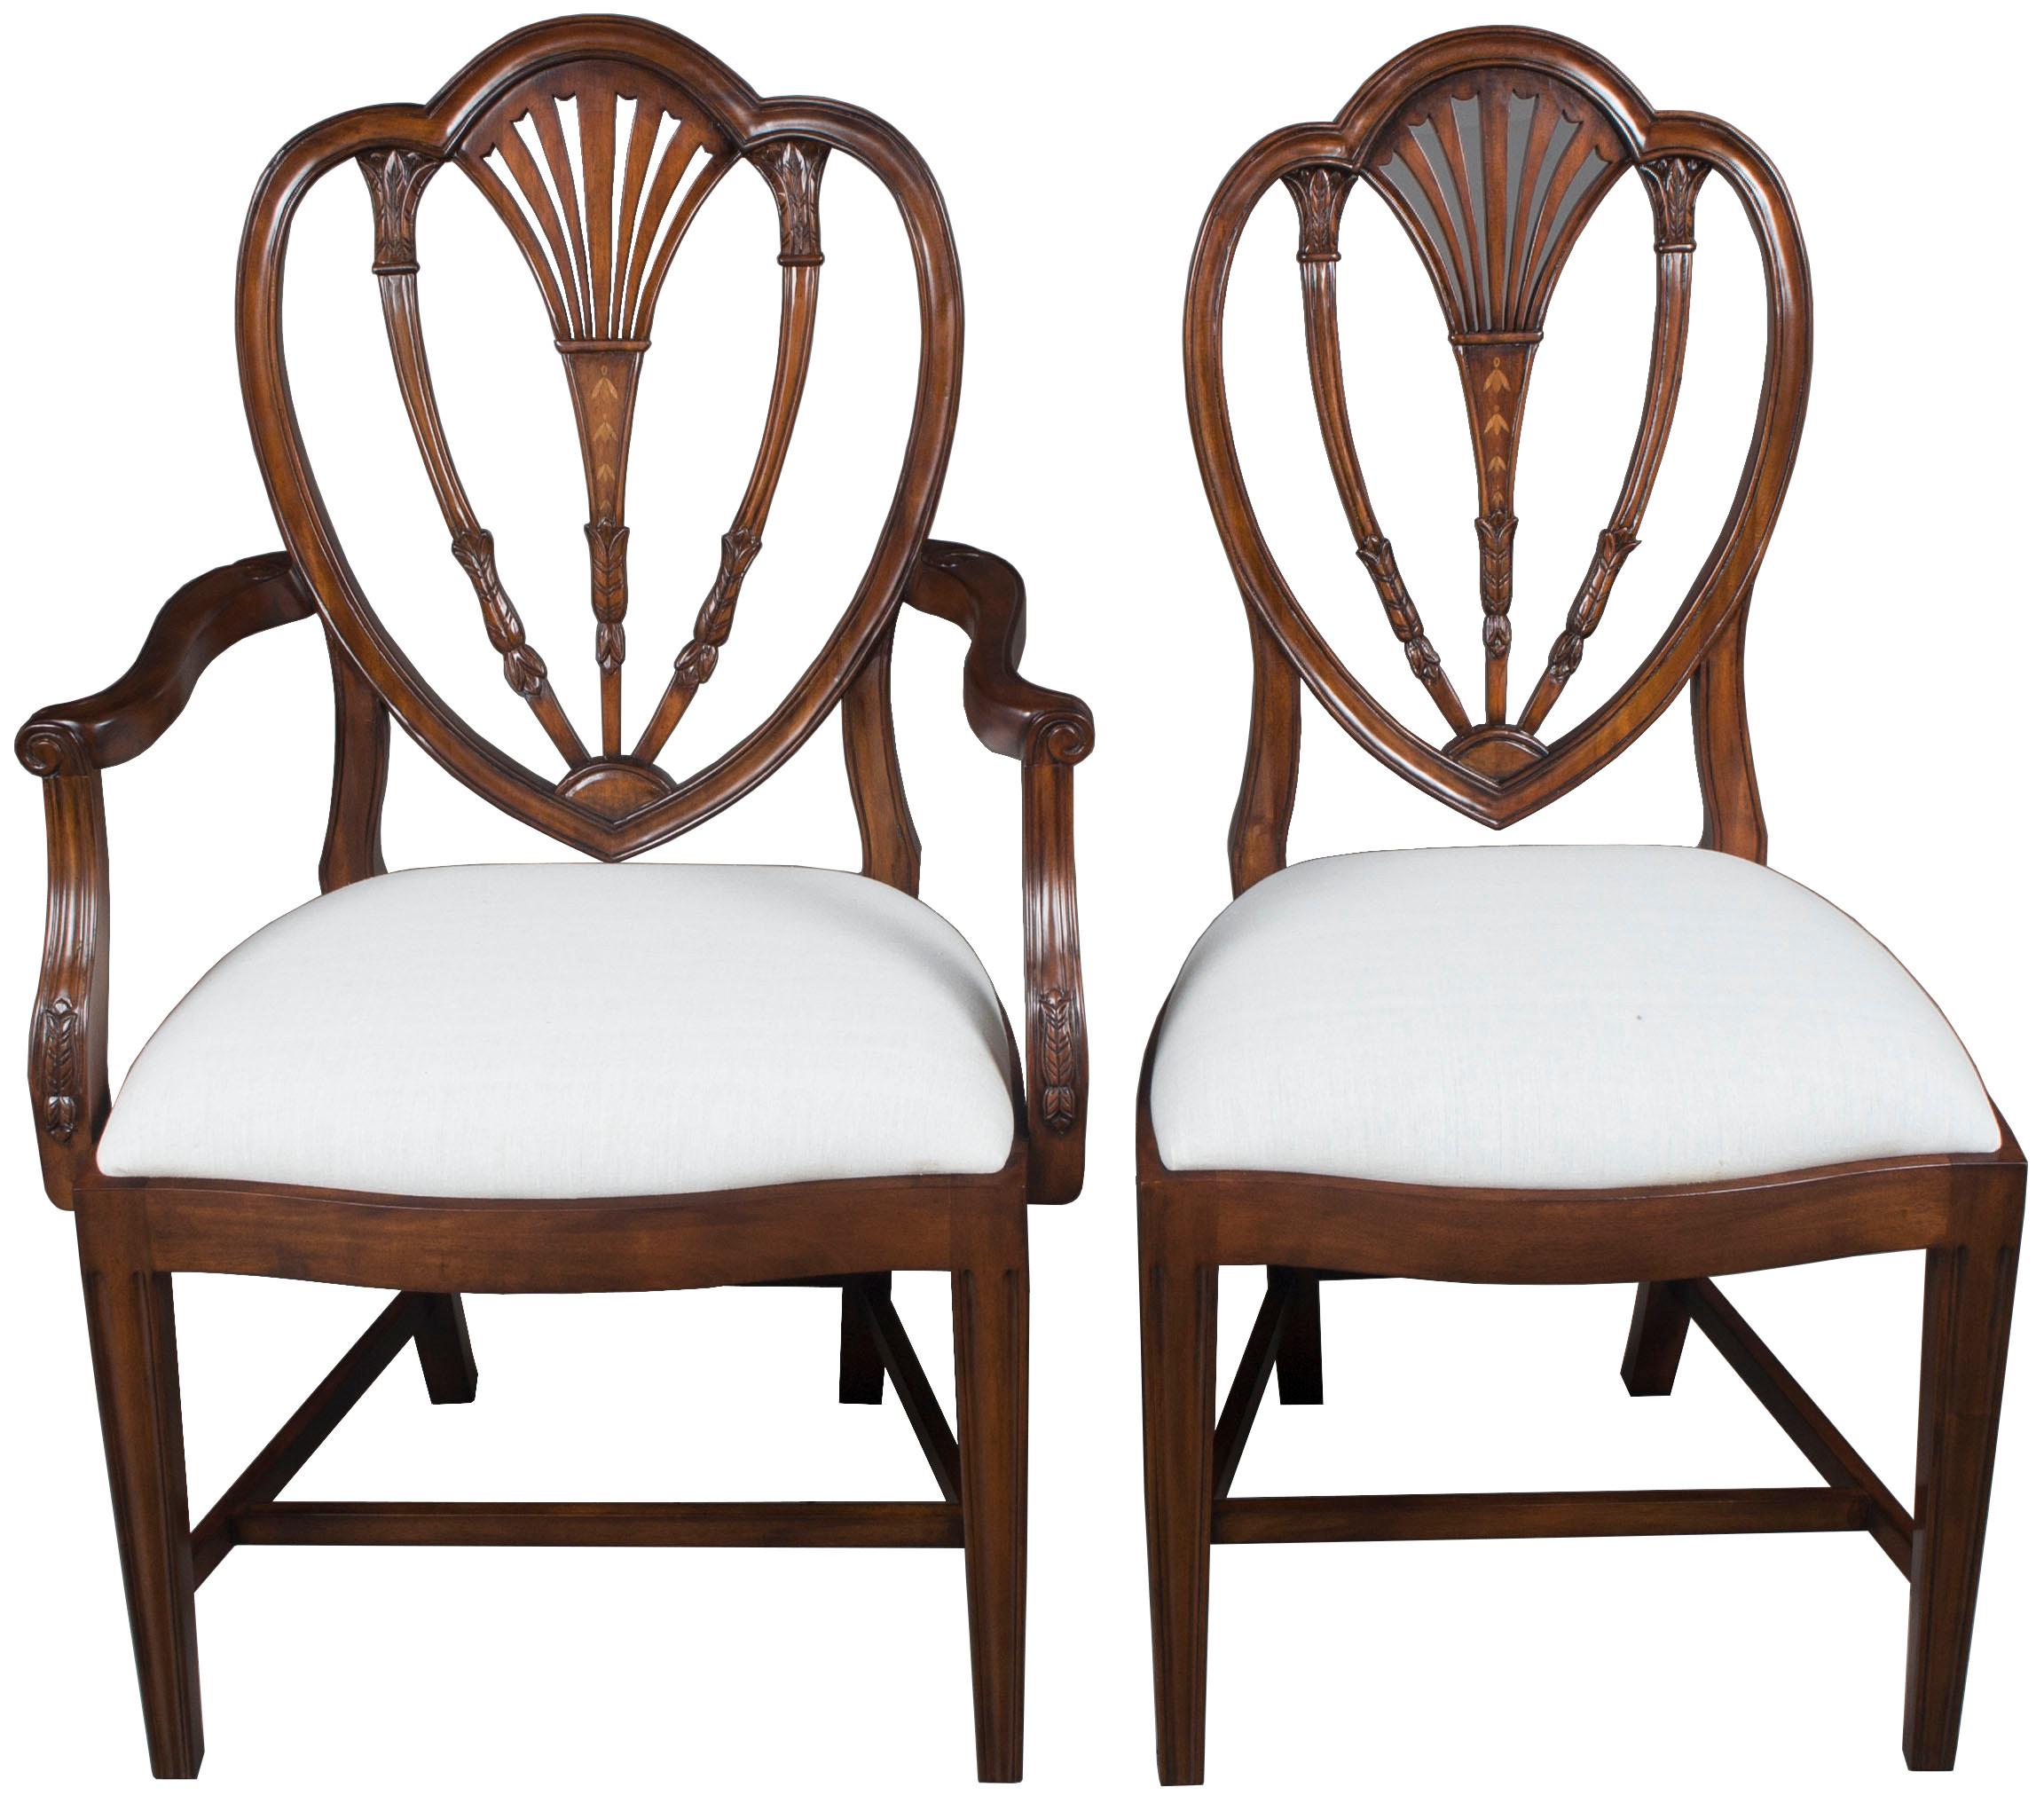 This lovely set of ten mahogany dining chairs consists of eight side chairs and two armchairs. The solid mahogany is lovely with a great color that will go well with any mahogany or even cherry table. Each chair is heavy and well built so they will